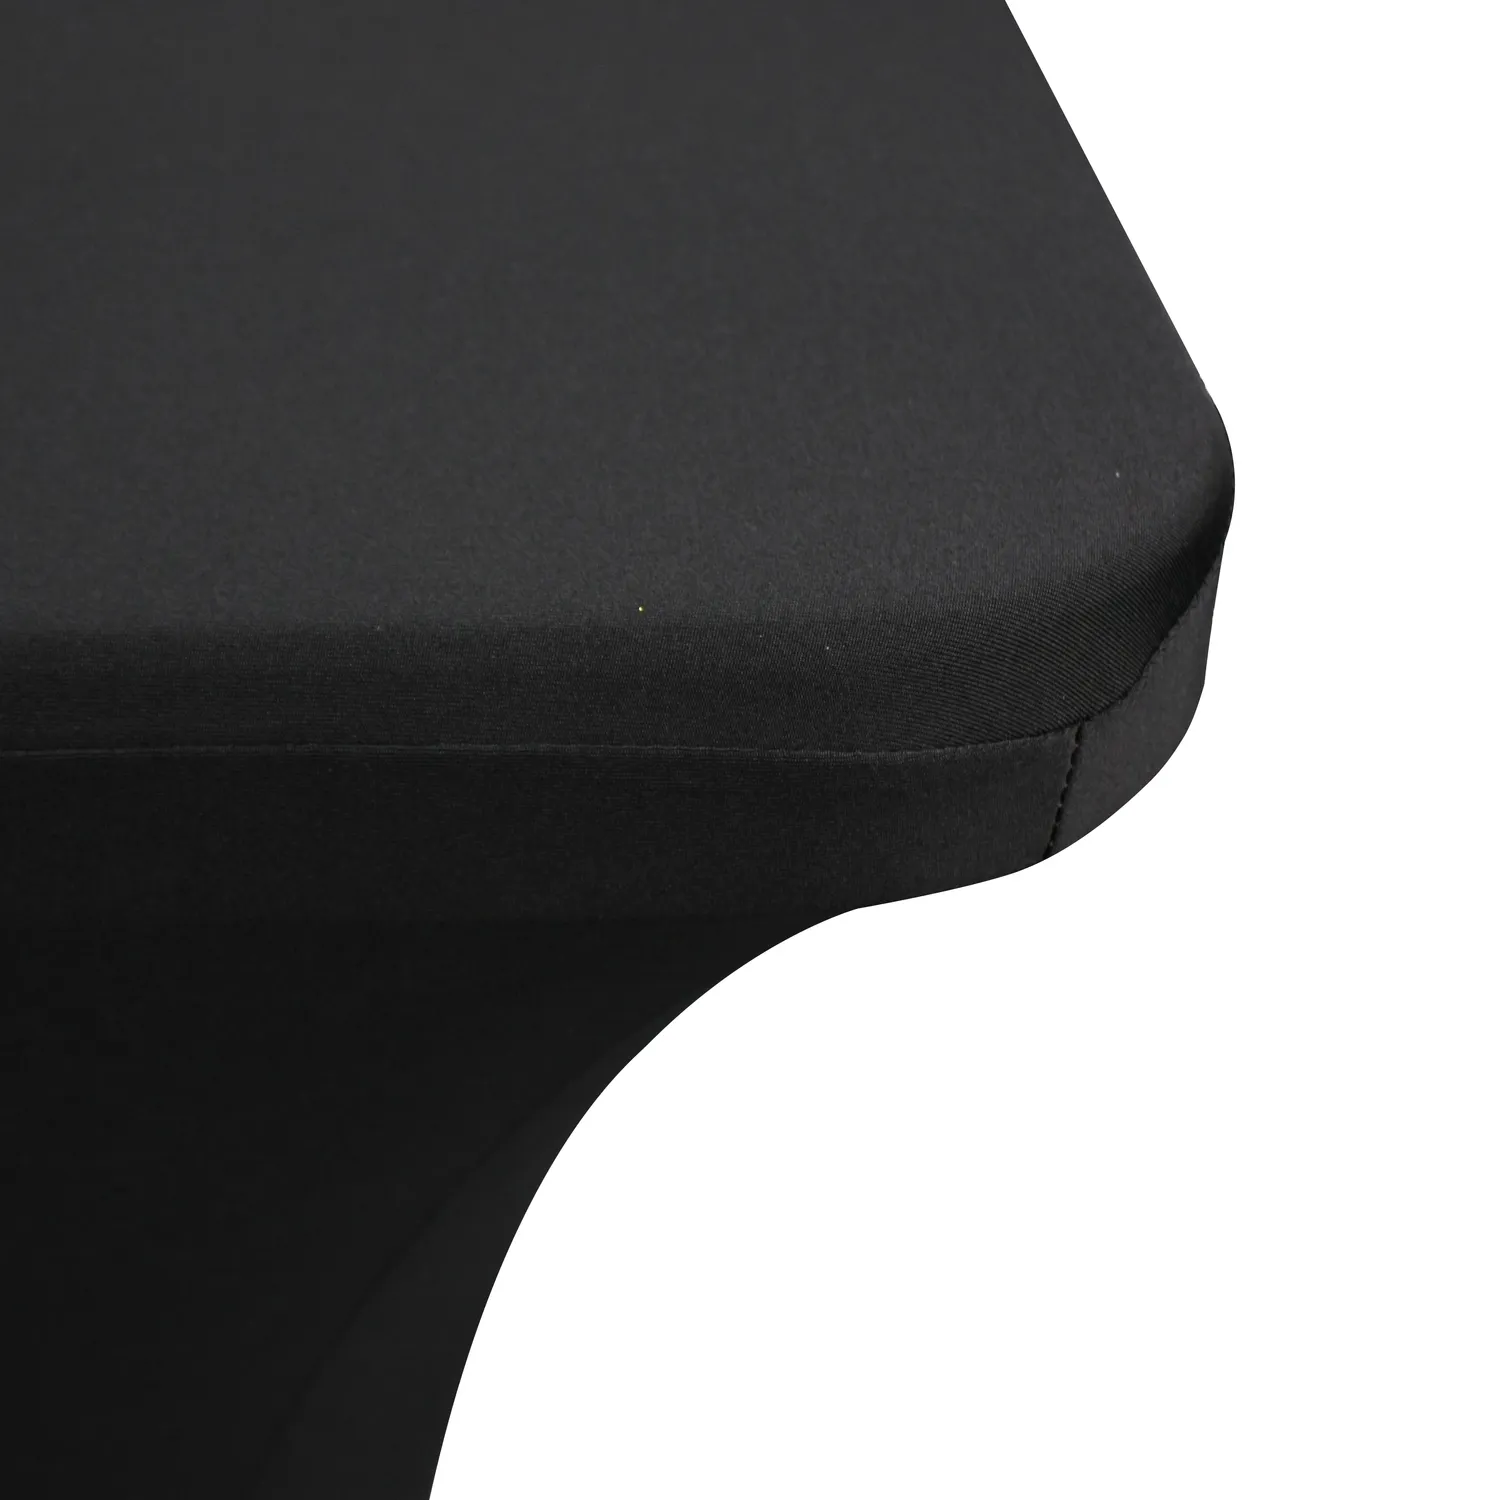 4ft 6ft 8ft Black White lycra Stretch Banquet Table Cloth Salon SPA Tablecloths Factory Massage Treatment Spandex Table Cover Y200421232a